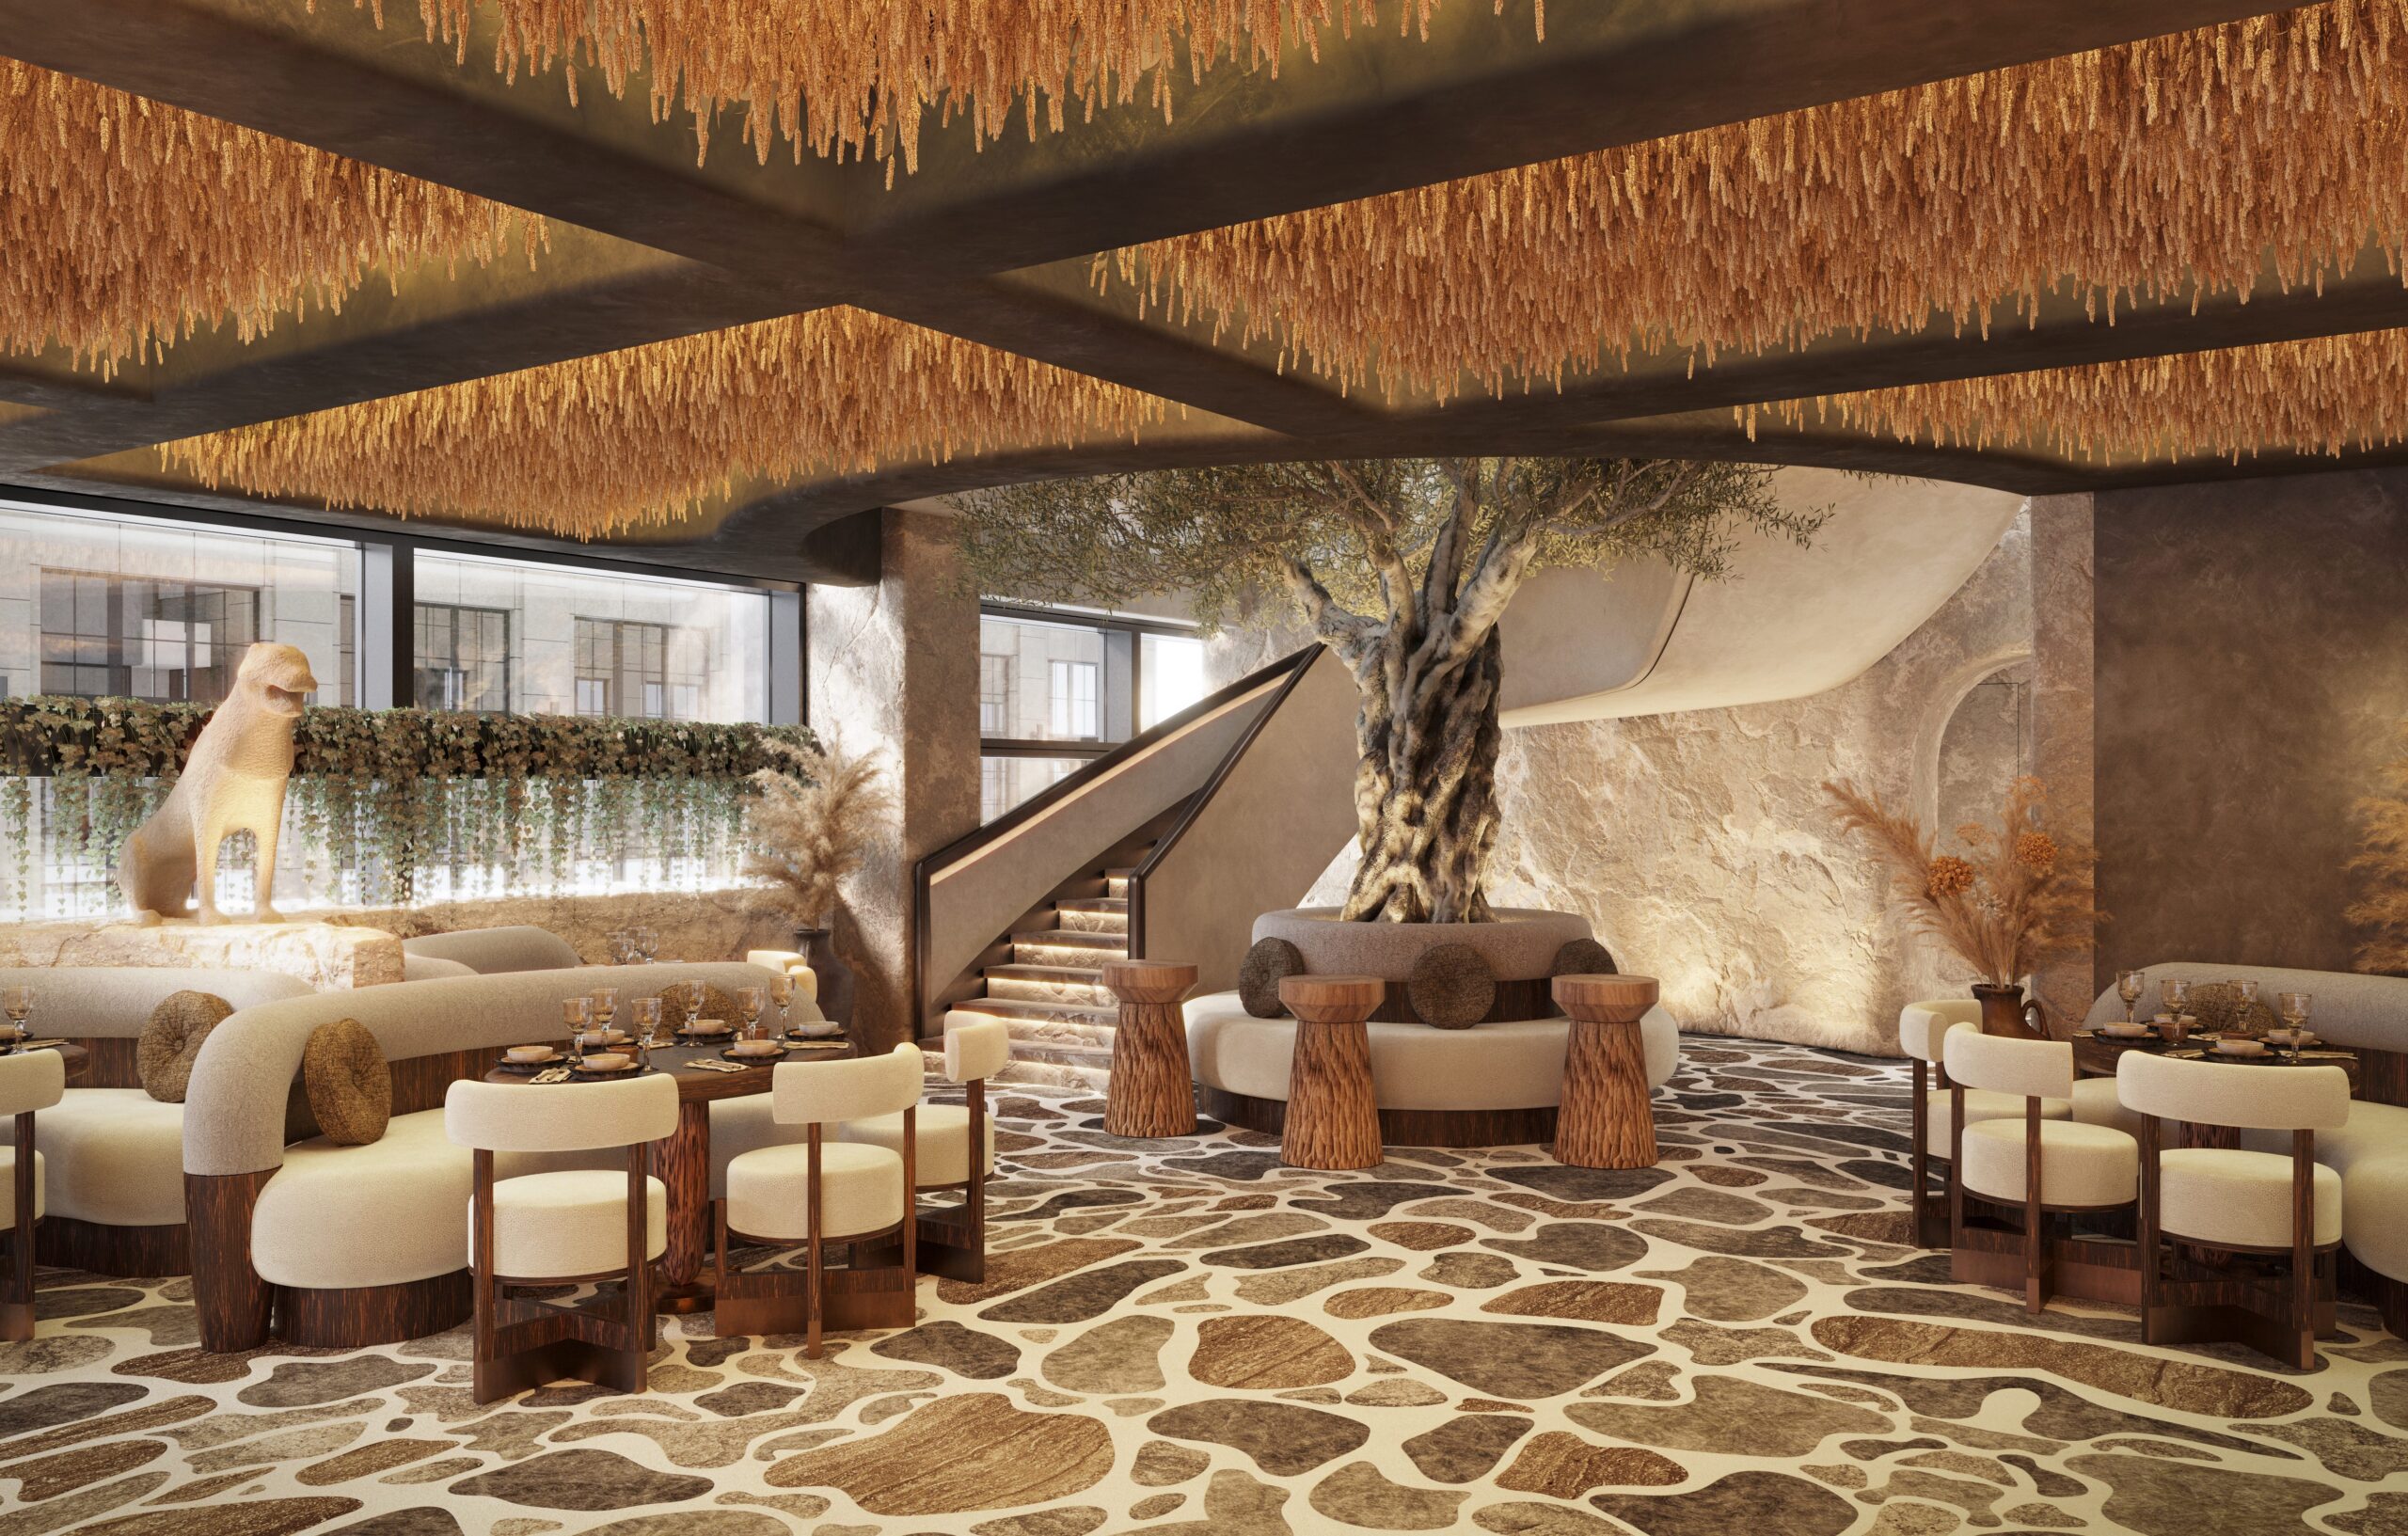 A huge tree and gold fauna will be the stars of Fenix's beautiful restaurant interior. Credit: Supplied